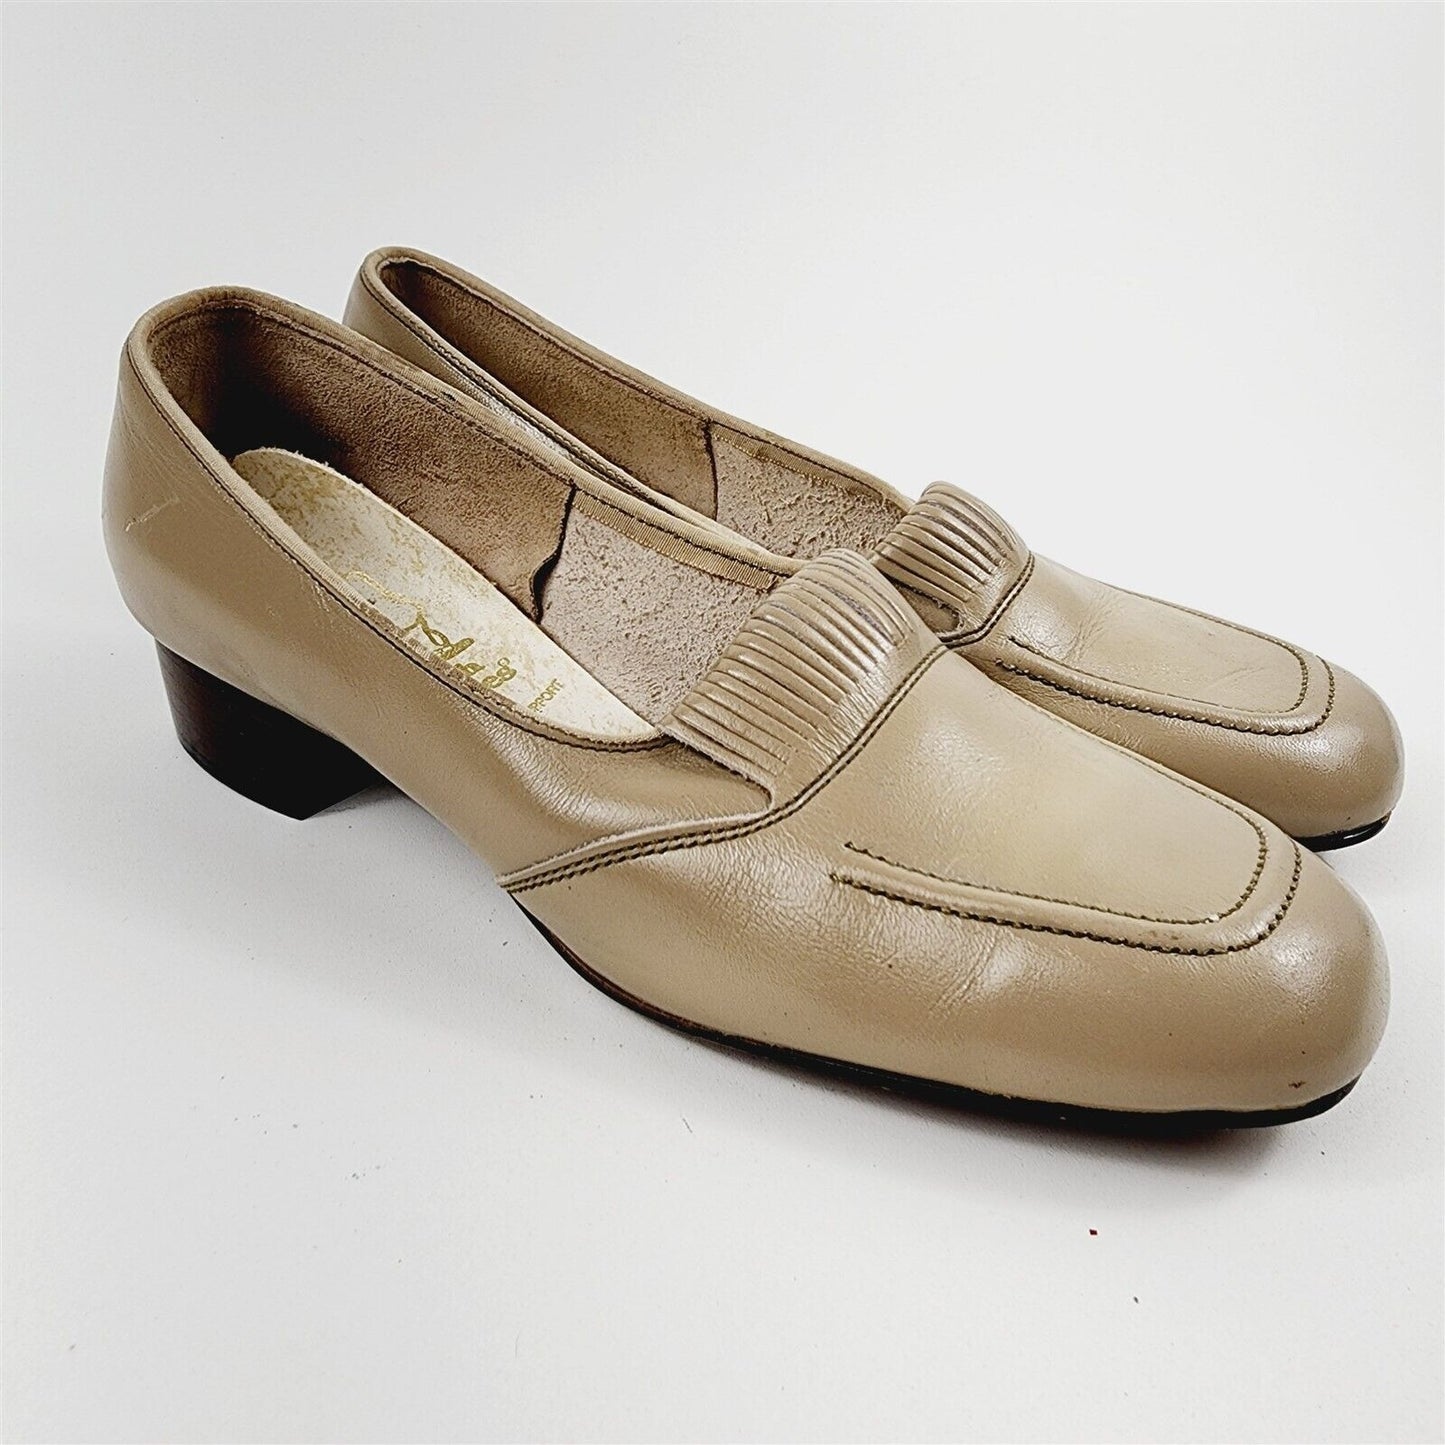 Vintage Hush Puppies Taupe Leather Loafers Womens Size 8 M